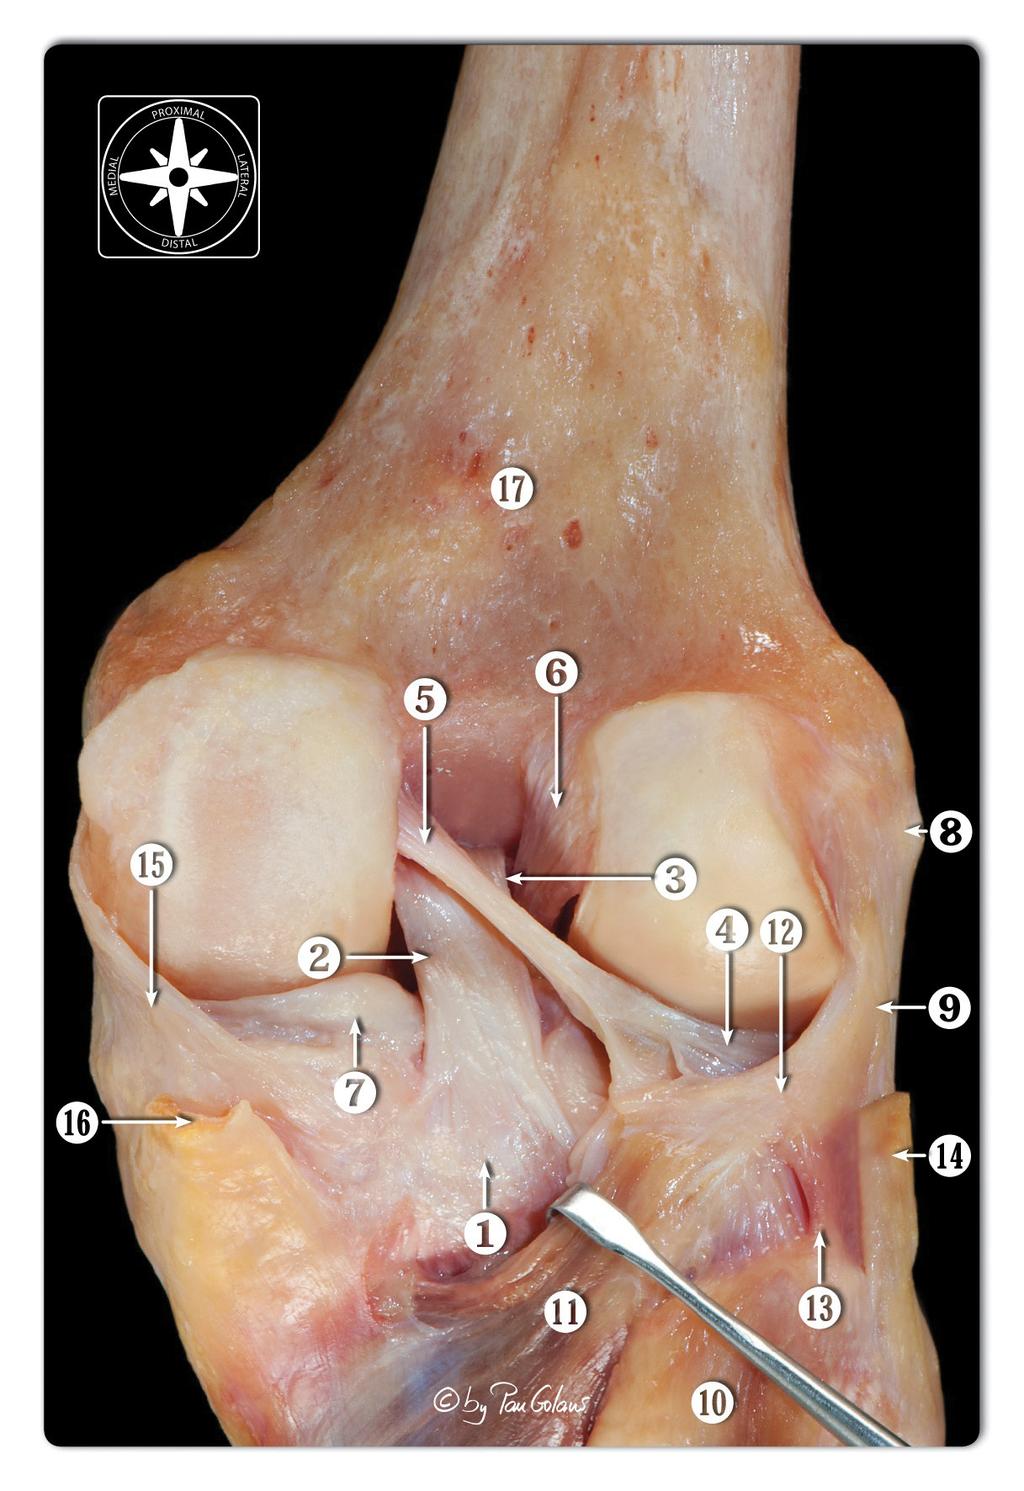 5=coronary ligament (meniscotibial capsule), 6=anterior horn of the medial meniscus, 7=lateral epicondyle, 8=lateral collateral ligament, 9=medial epicondyle, 10=medial collateral ligament,